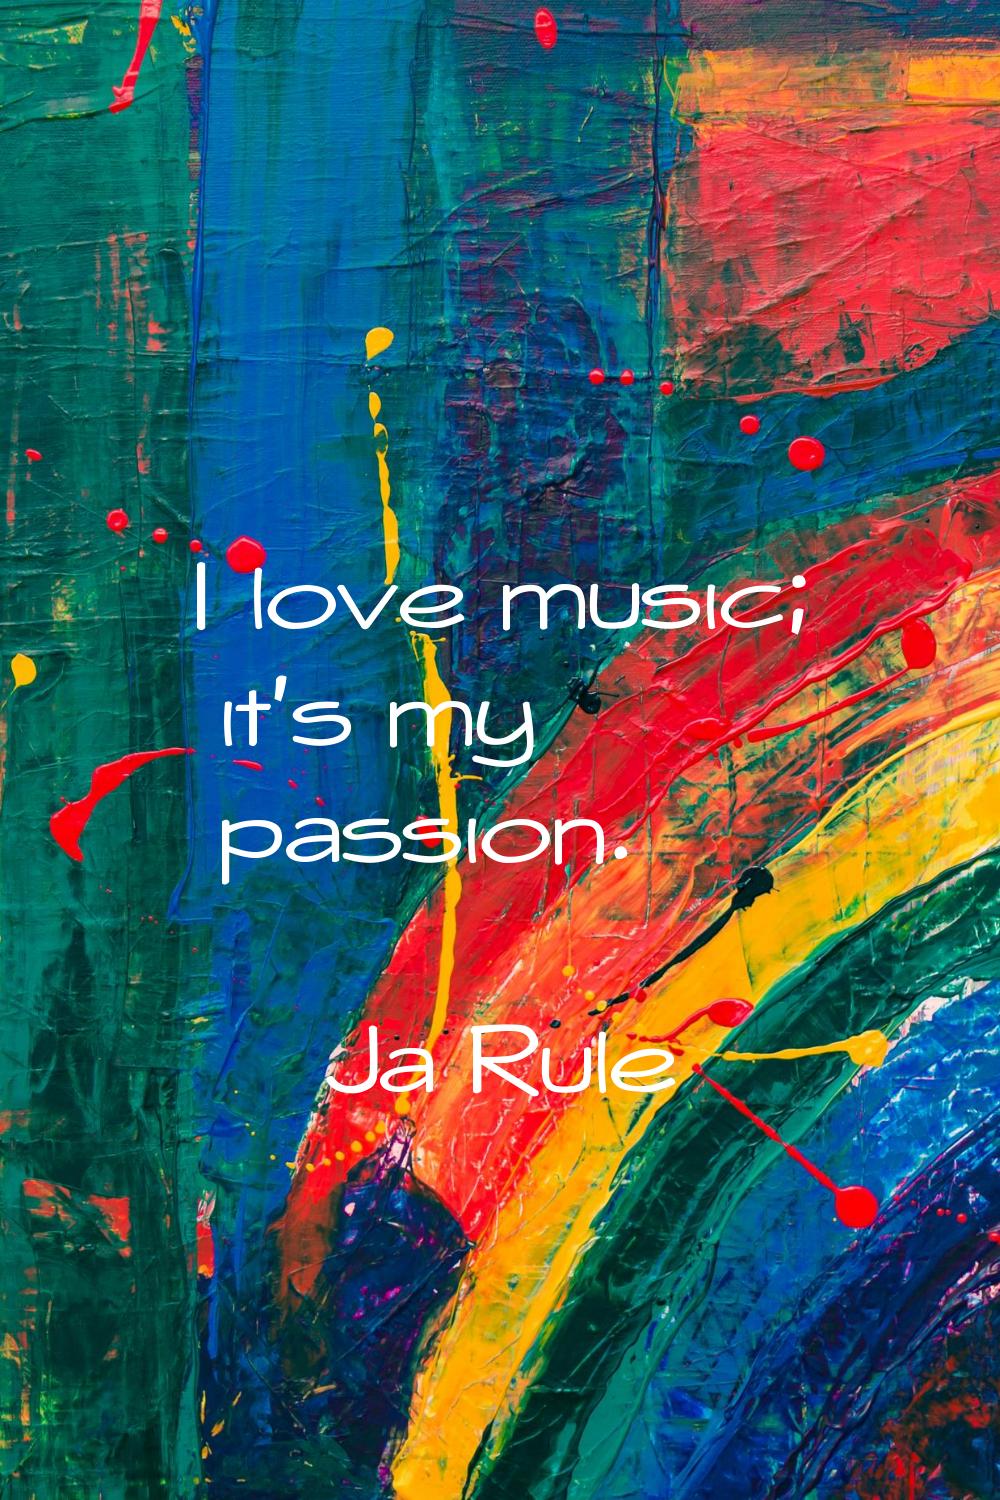 I love music; it's my passion.